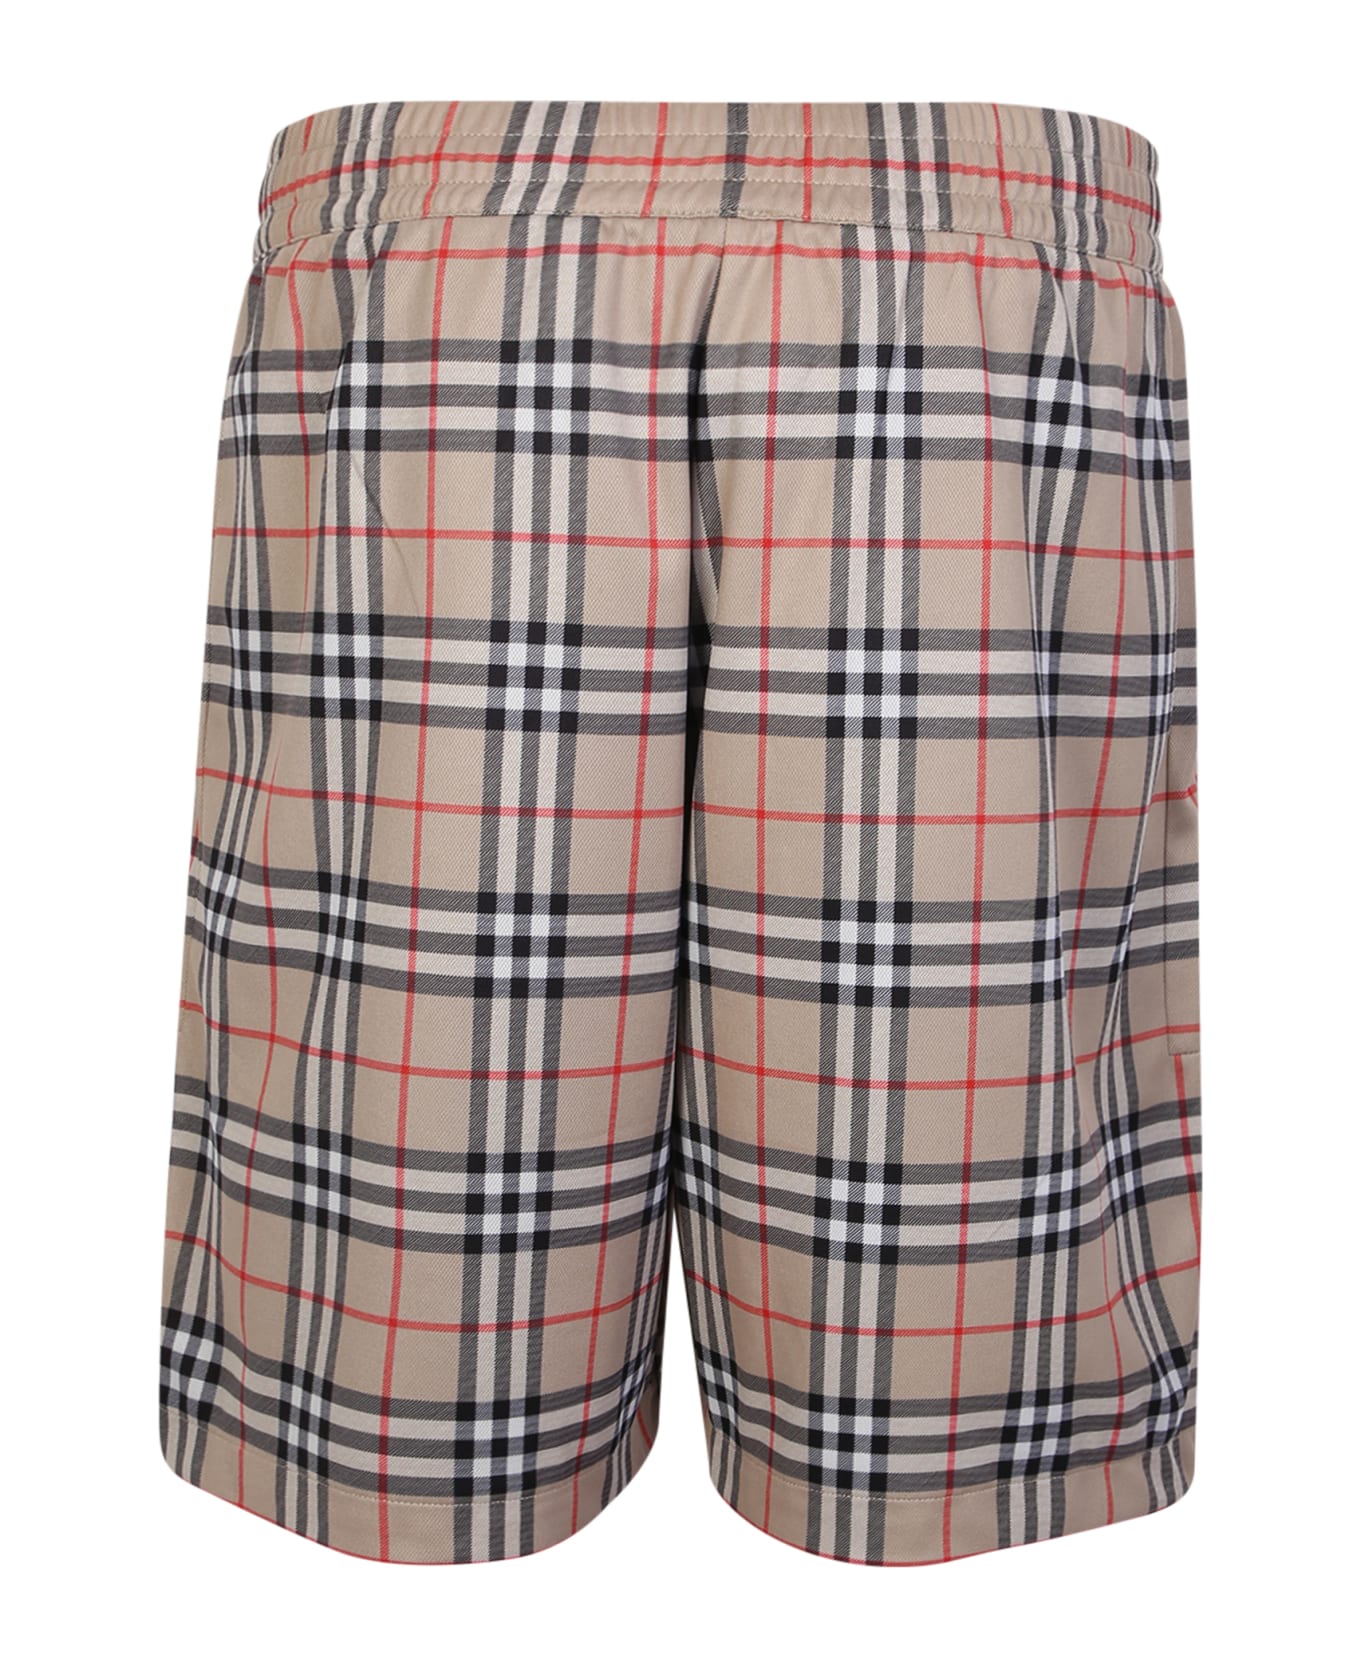 Burberry Check Shorts - Archive Beige